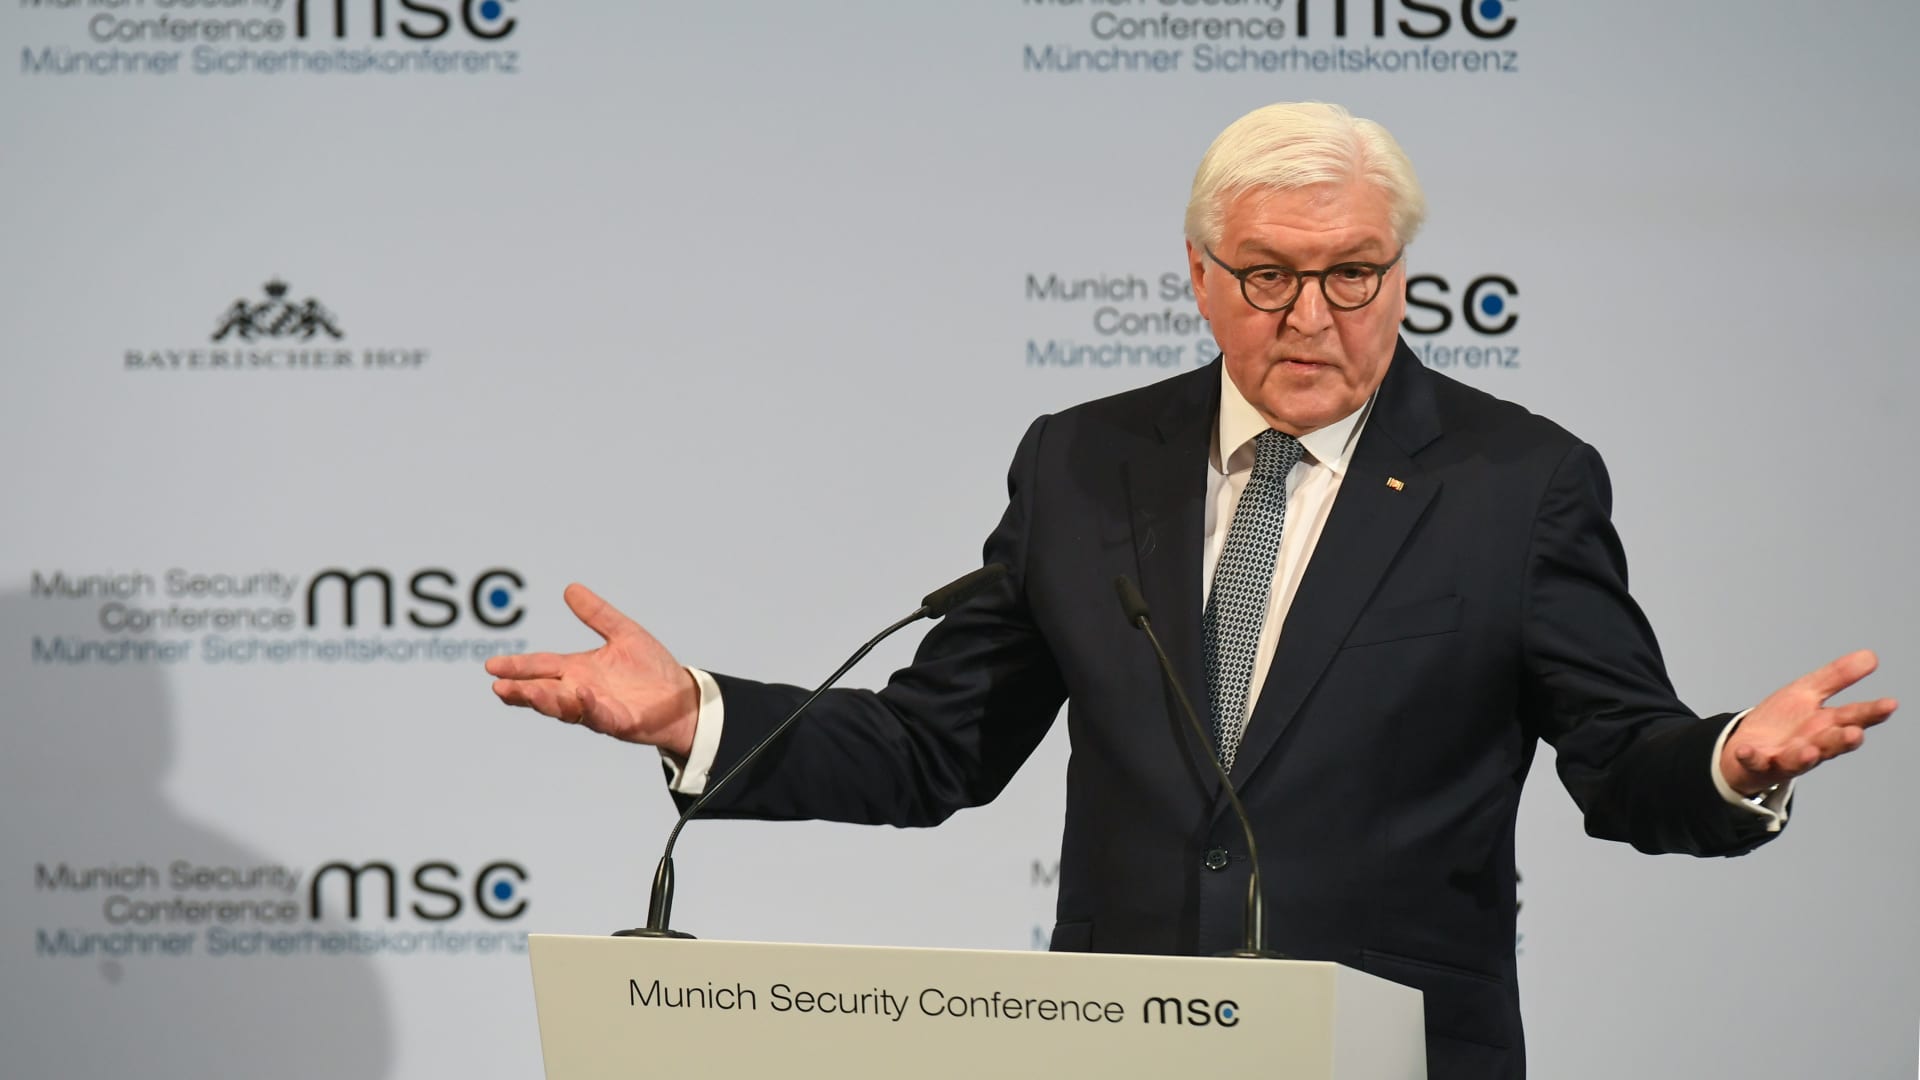 German President Frank-Walter Steinmeier addresses the opening speech of the 56th Munich Security Conference in Munich, southern Germany, on February 14, 2020.